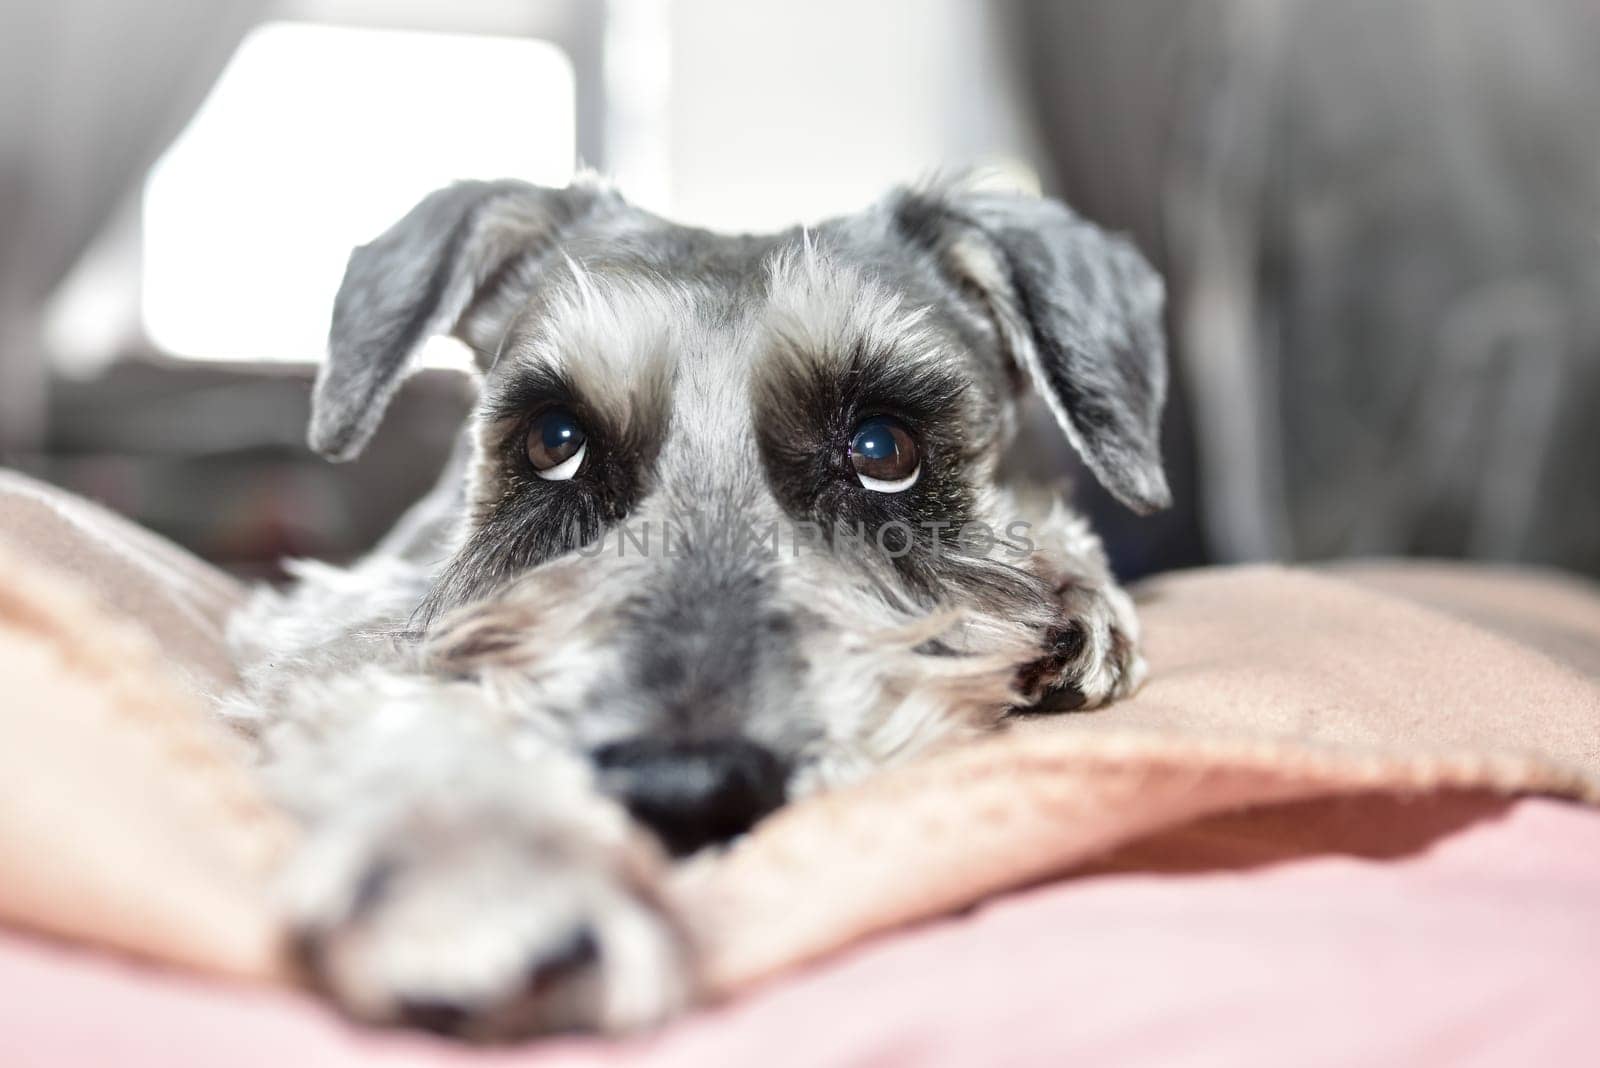 A grey dog of the Schnauzer breed cutely looks up while lying on the bed. Schnauzer dog looks with kind eyes, doggy is lying on the bed. by Nickstock